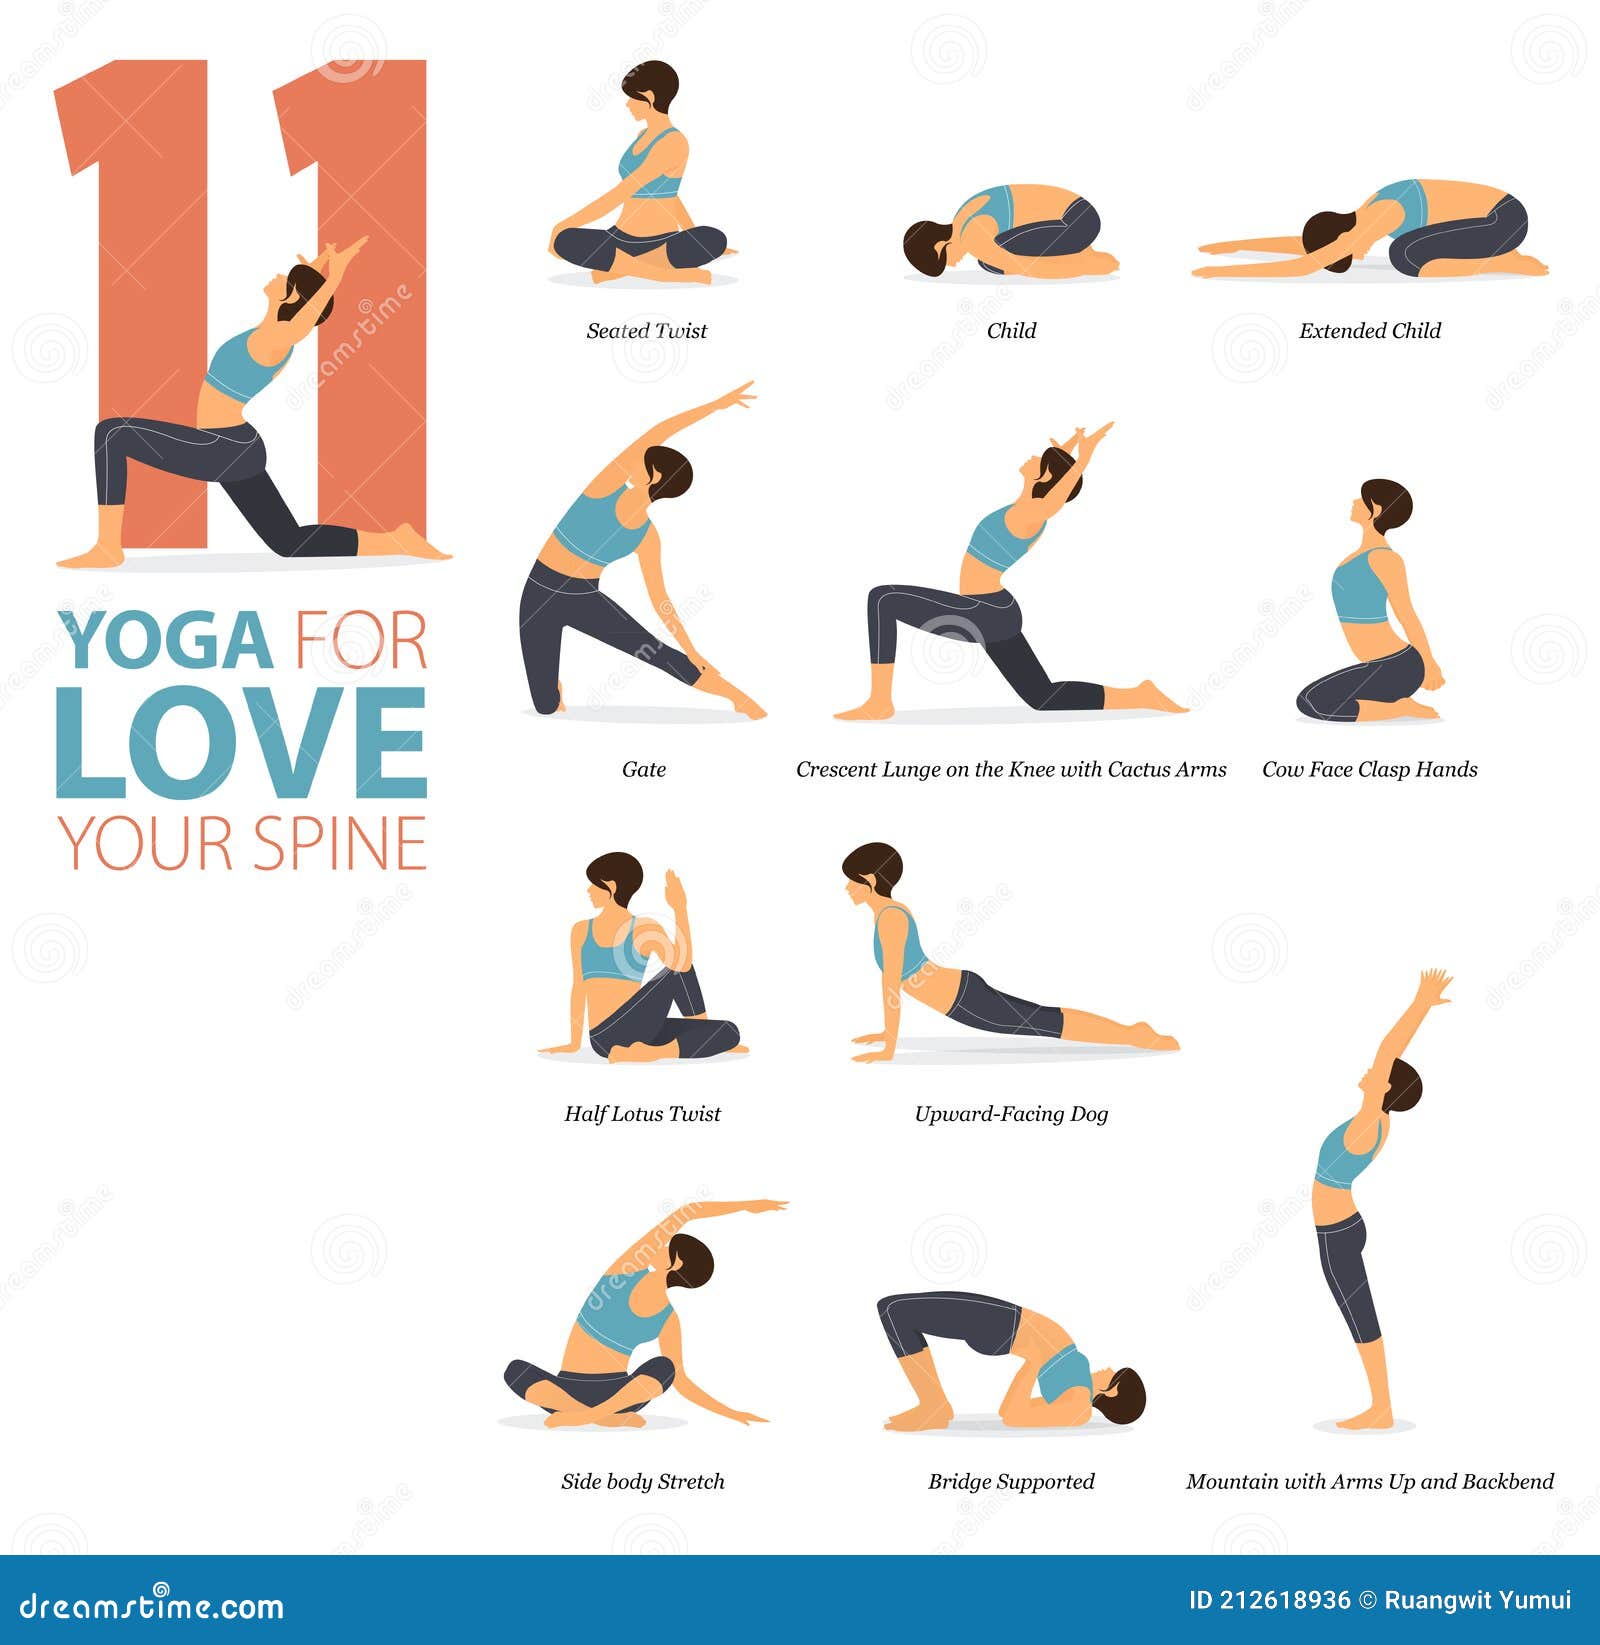 Yoga Selection | Soothing yoga sequence for your lumbar spine. This  therapeutic class is specially designed to decompress your lumbar spine,  providing muc... | Instagram